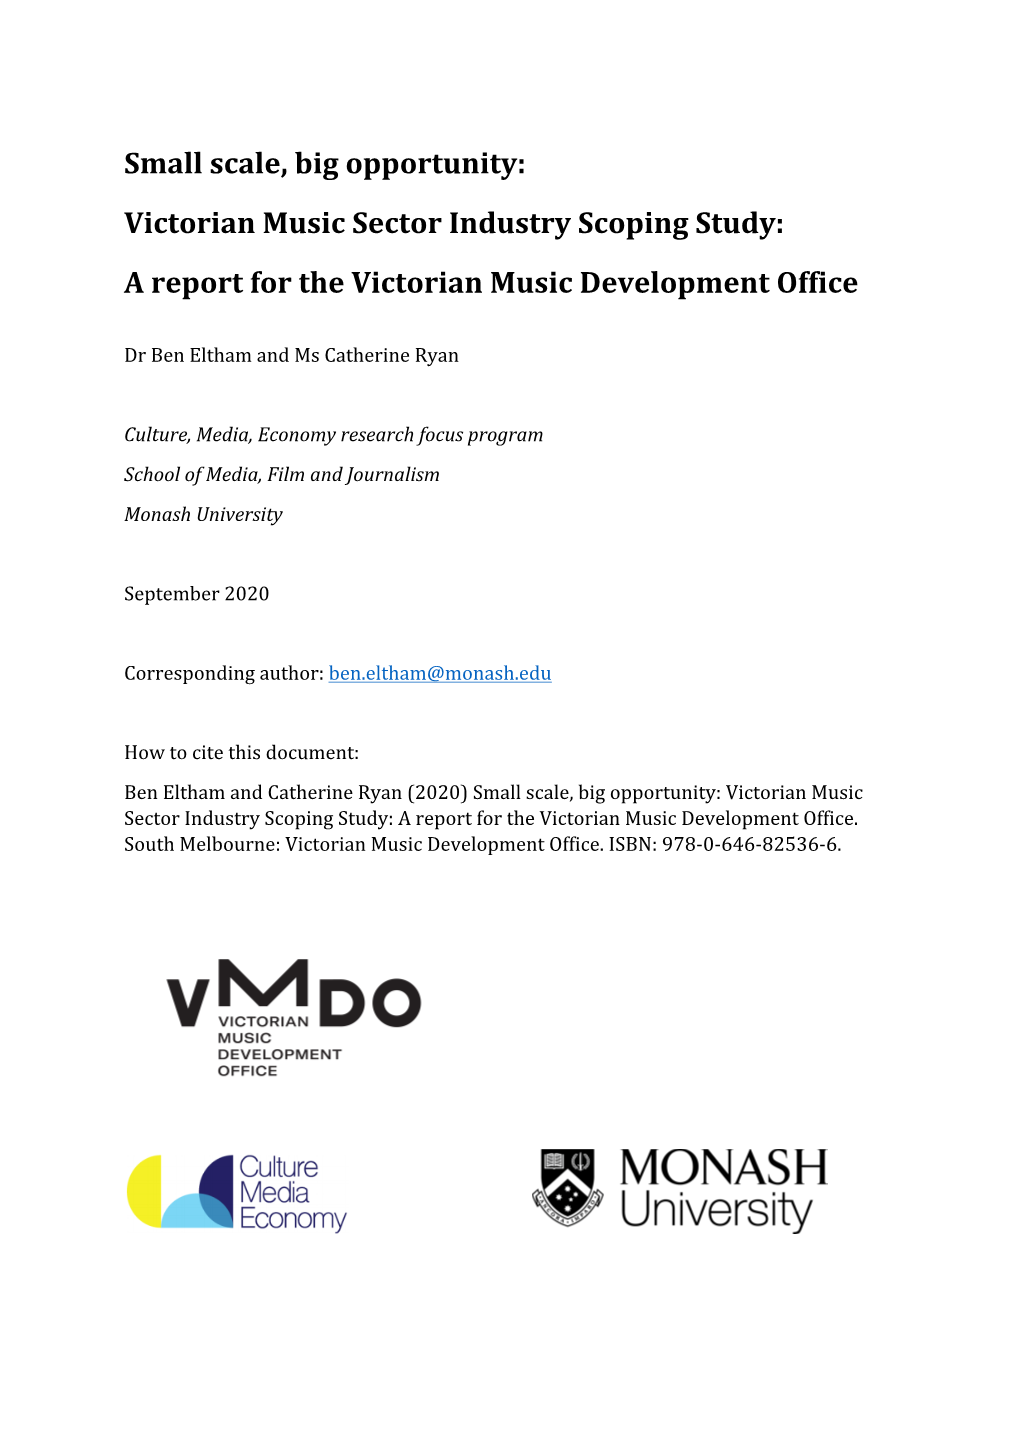 Victorian Music Sector Industry Scoping Study: a Report for the Victorian Music Development Office